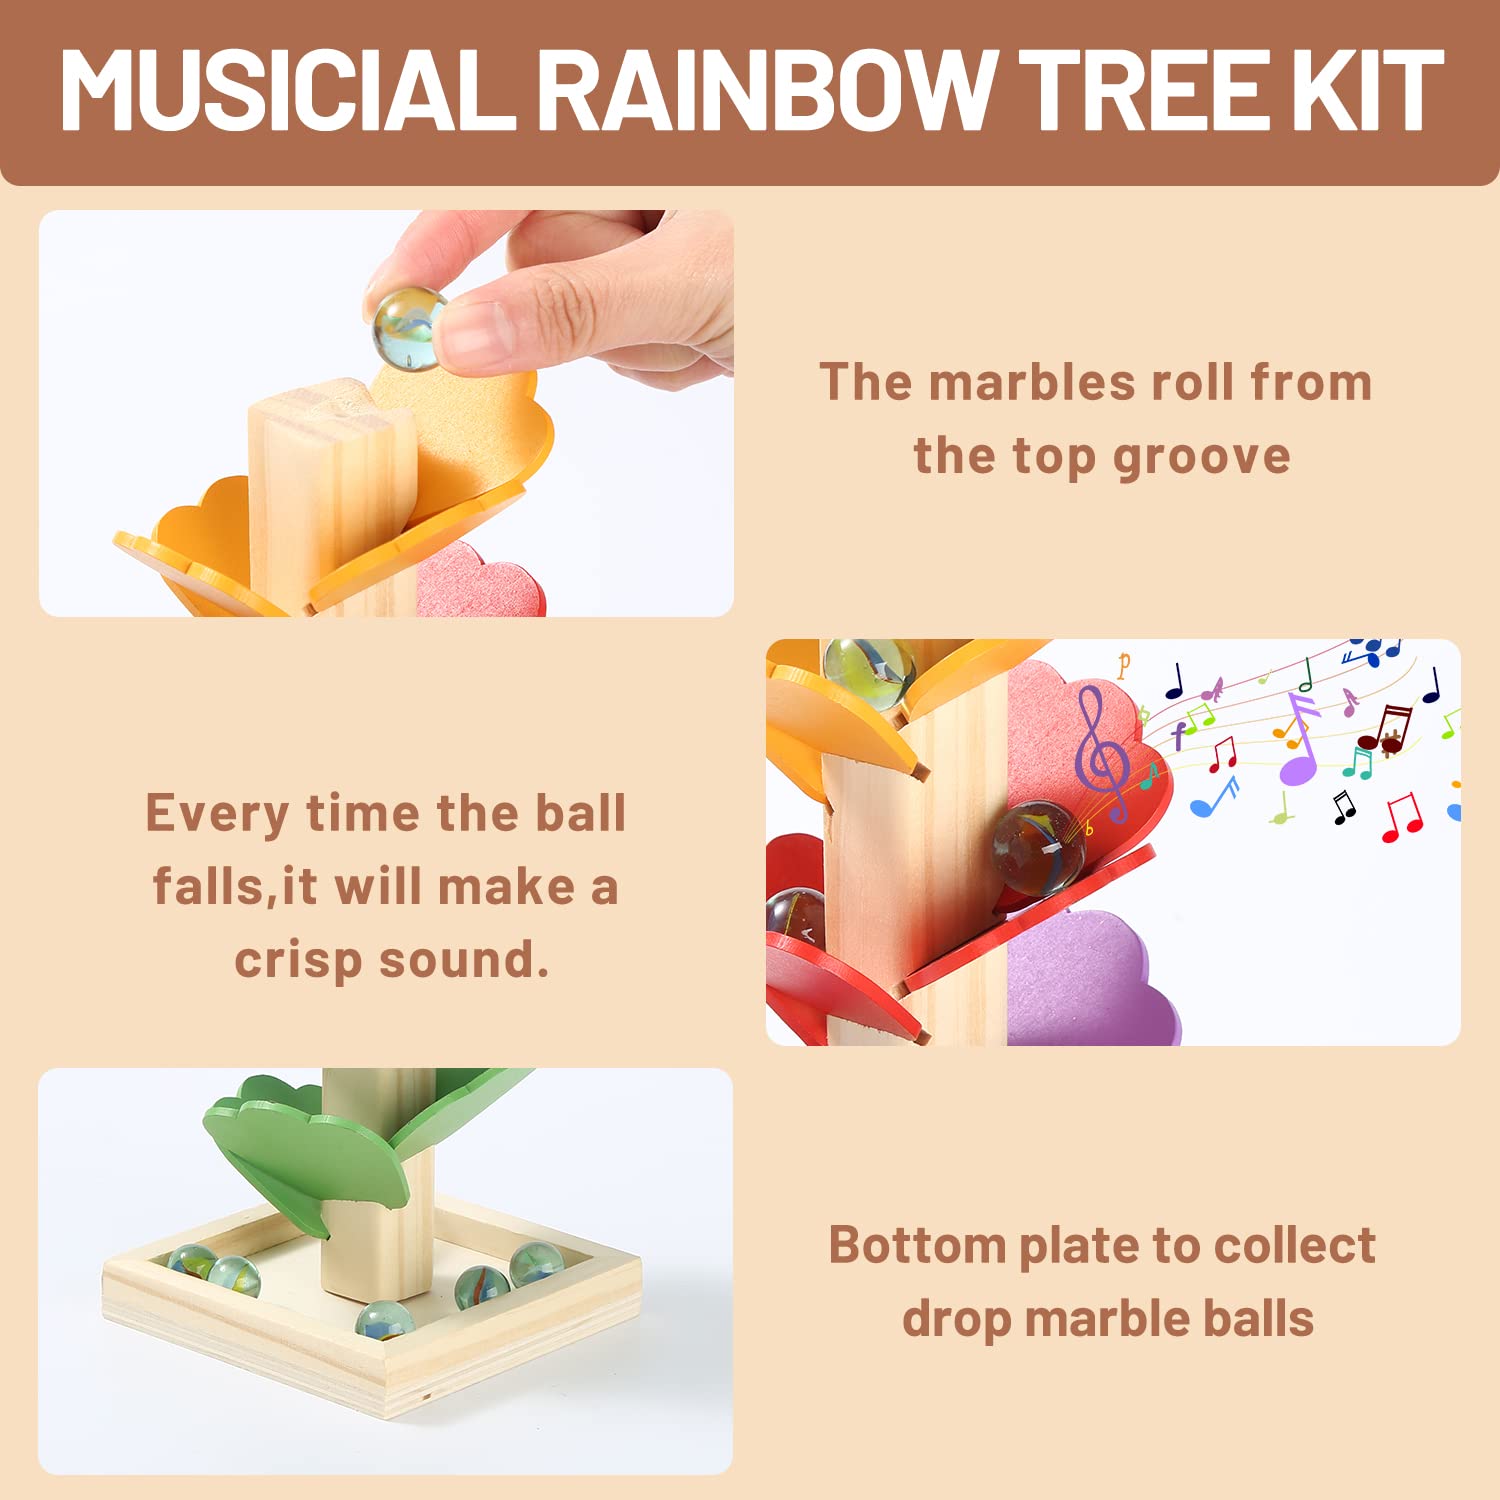 Wooden Music Tree Toy for Kids, Wood Marble Run Marble Track Game for Toddlers, Ball Drop Toy Ball Tower Montessori Educational Toy Boy Girl Valentines Gifts, Race and Chase Rainbow Musical Tree Kit